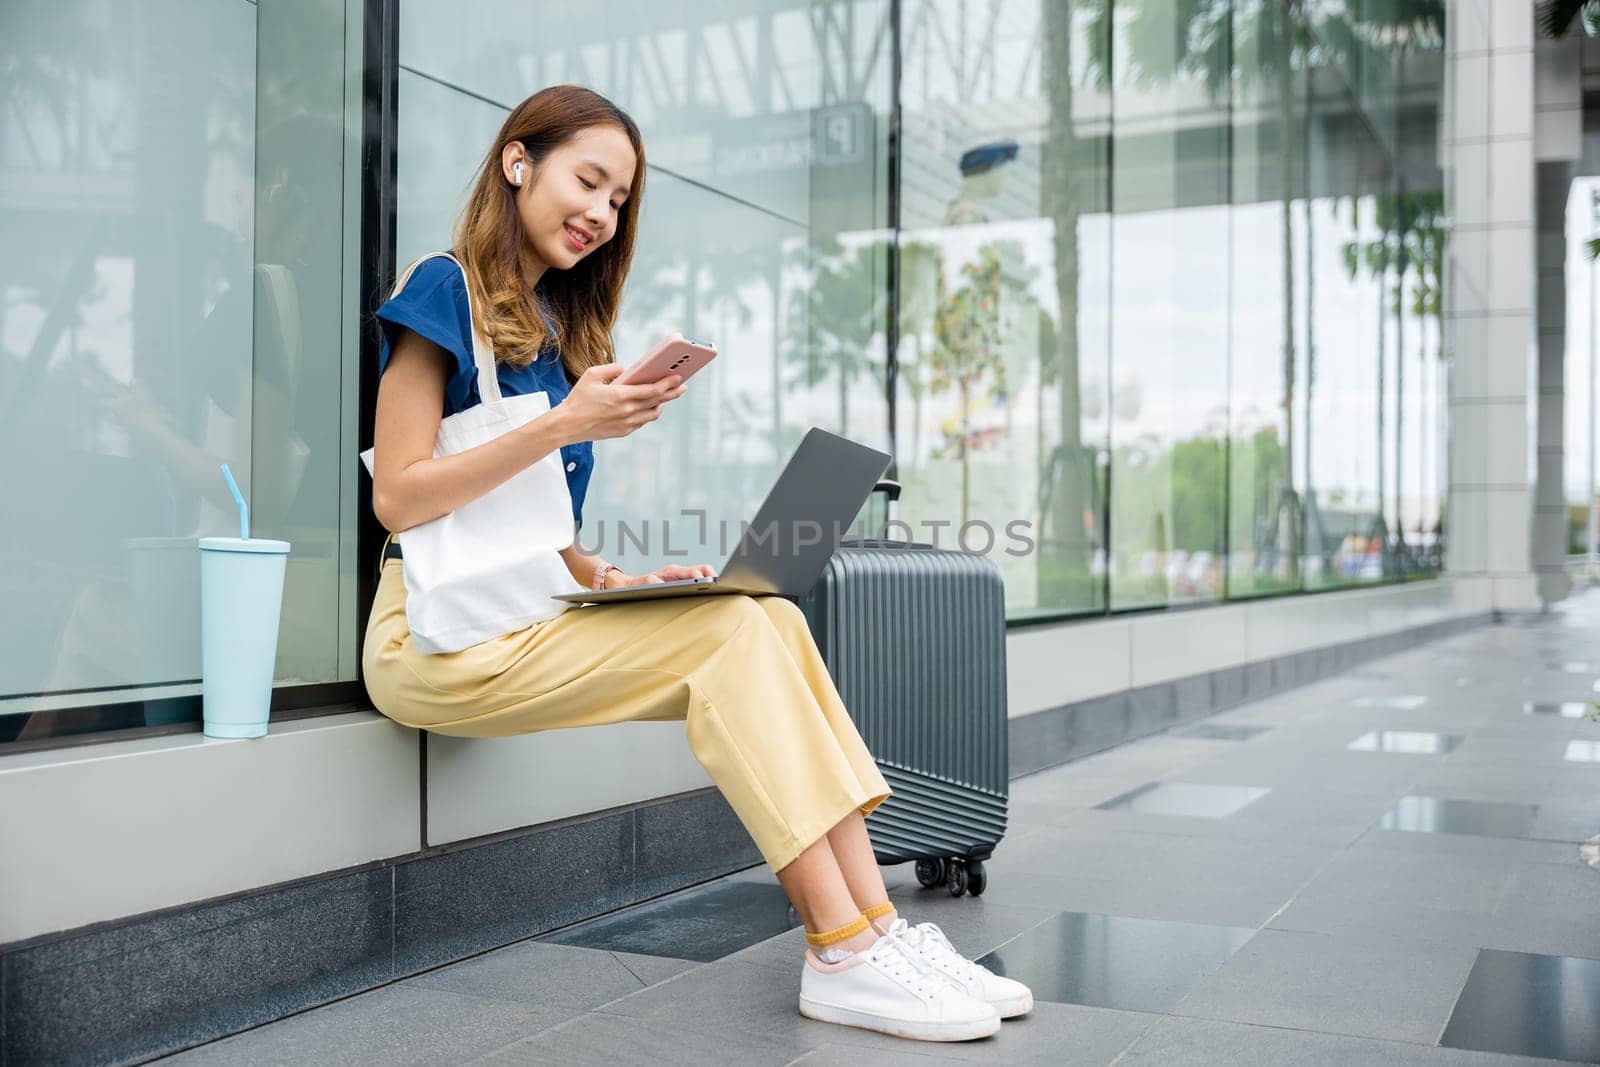 A girl works remotely from a train station, with her laptop and luggage beside her by Sorapop